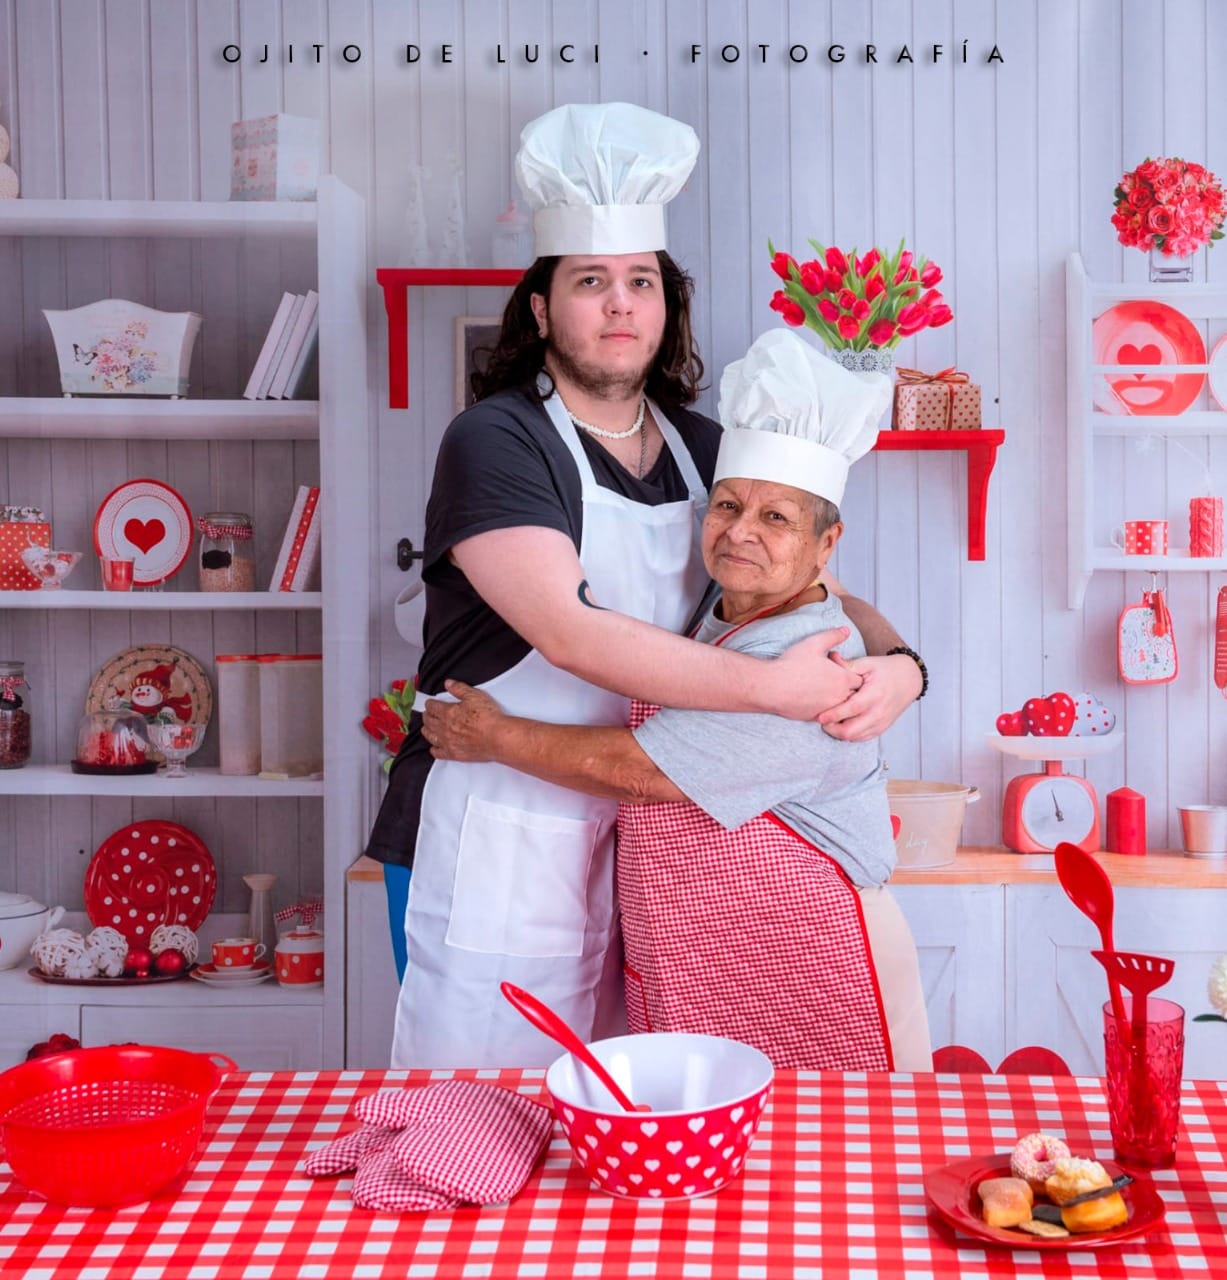 Kate Valentine's Day Love Bake Kitchen Backdrop for Photography